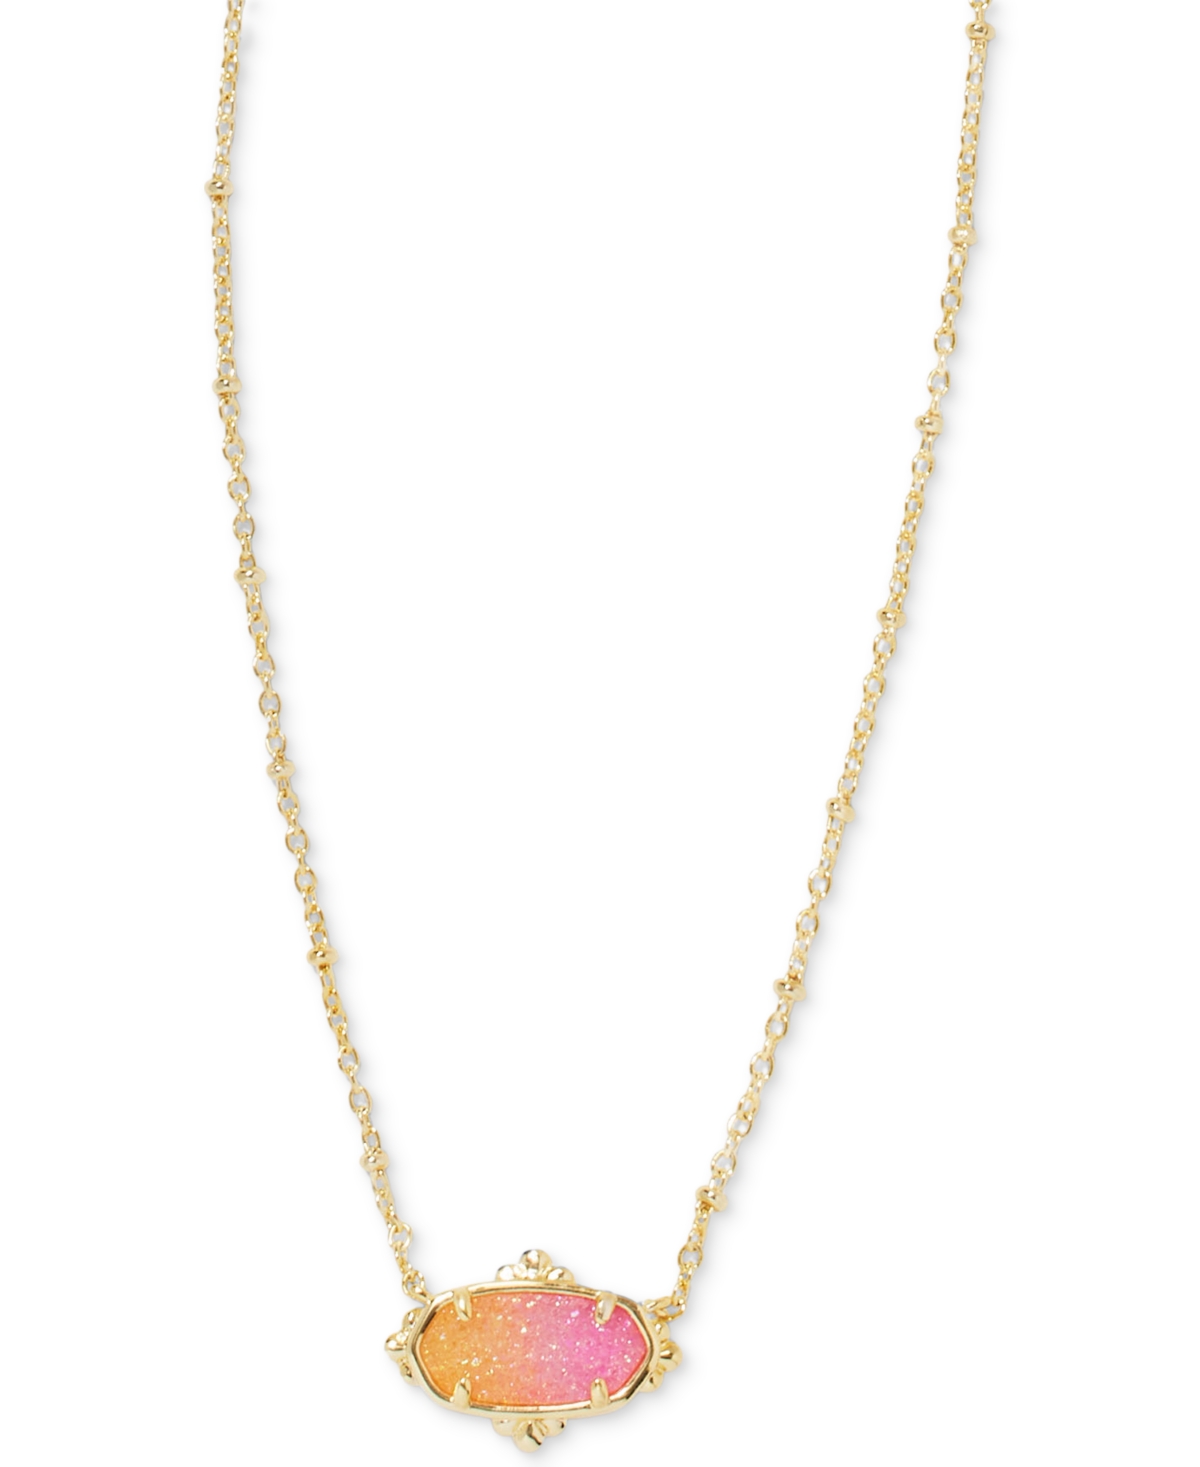 Shop Kendra Scott 14k Gold-plated Drusy Stone 19" Adjustable Pendant Necklace In Sunrise Ombre Drusy